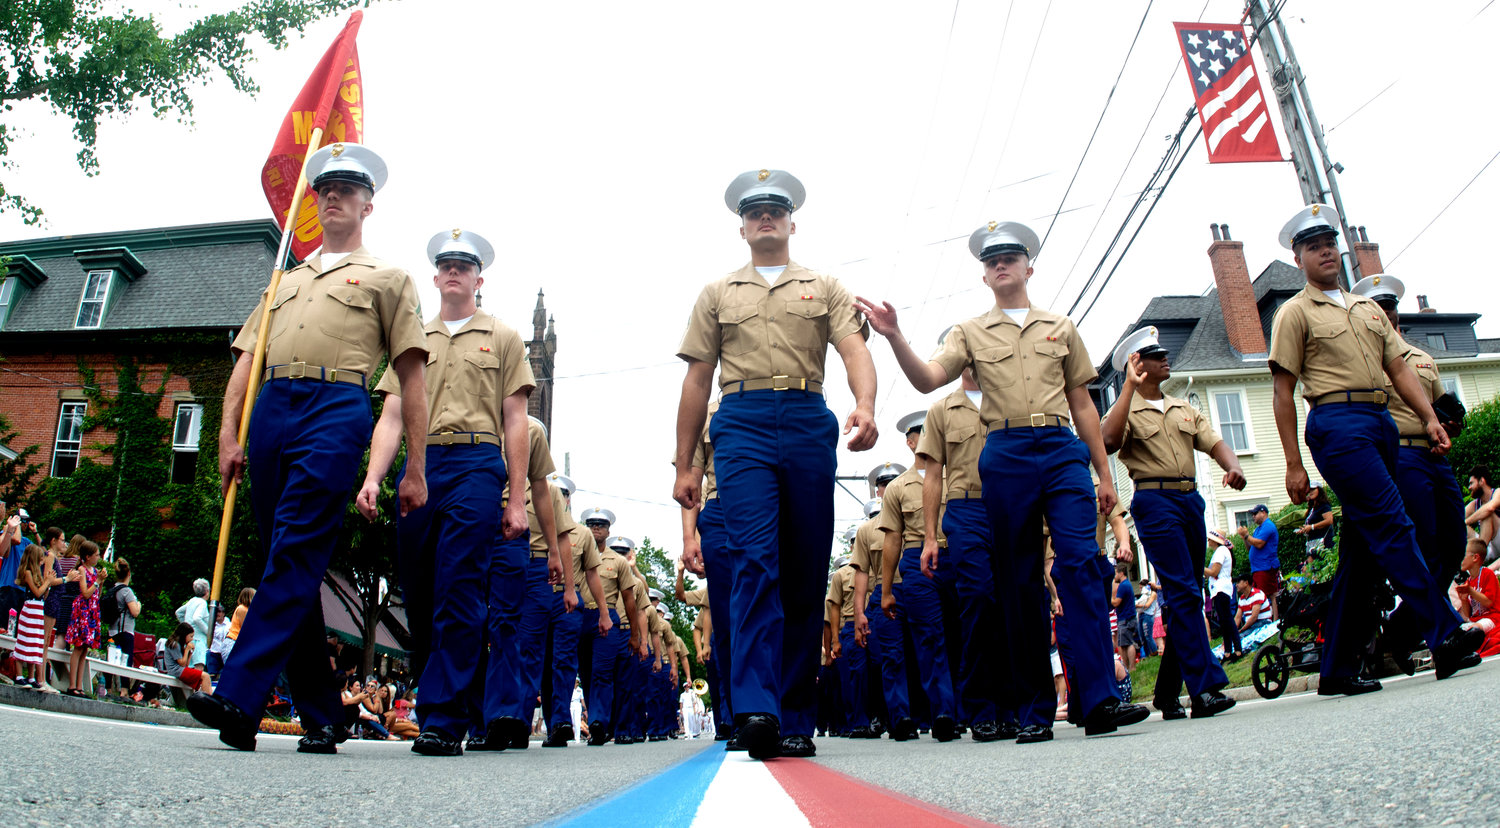 U.S. Marines march downtown.